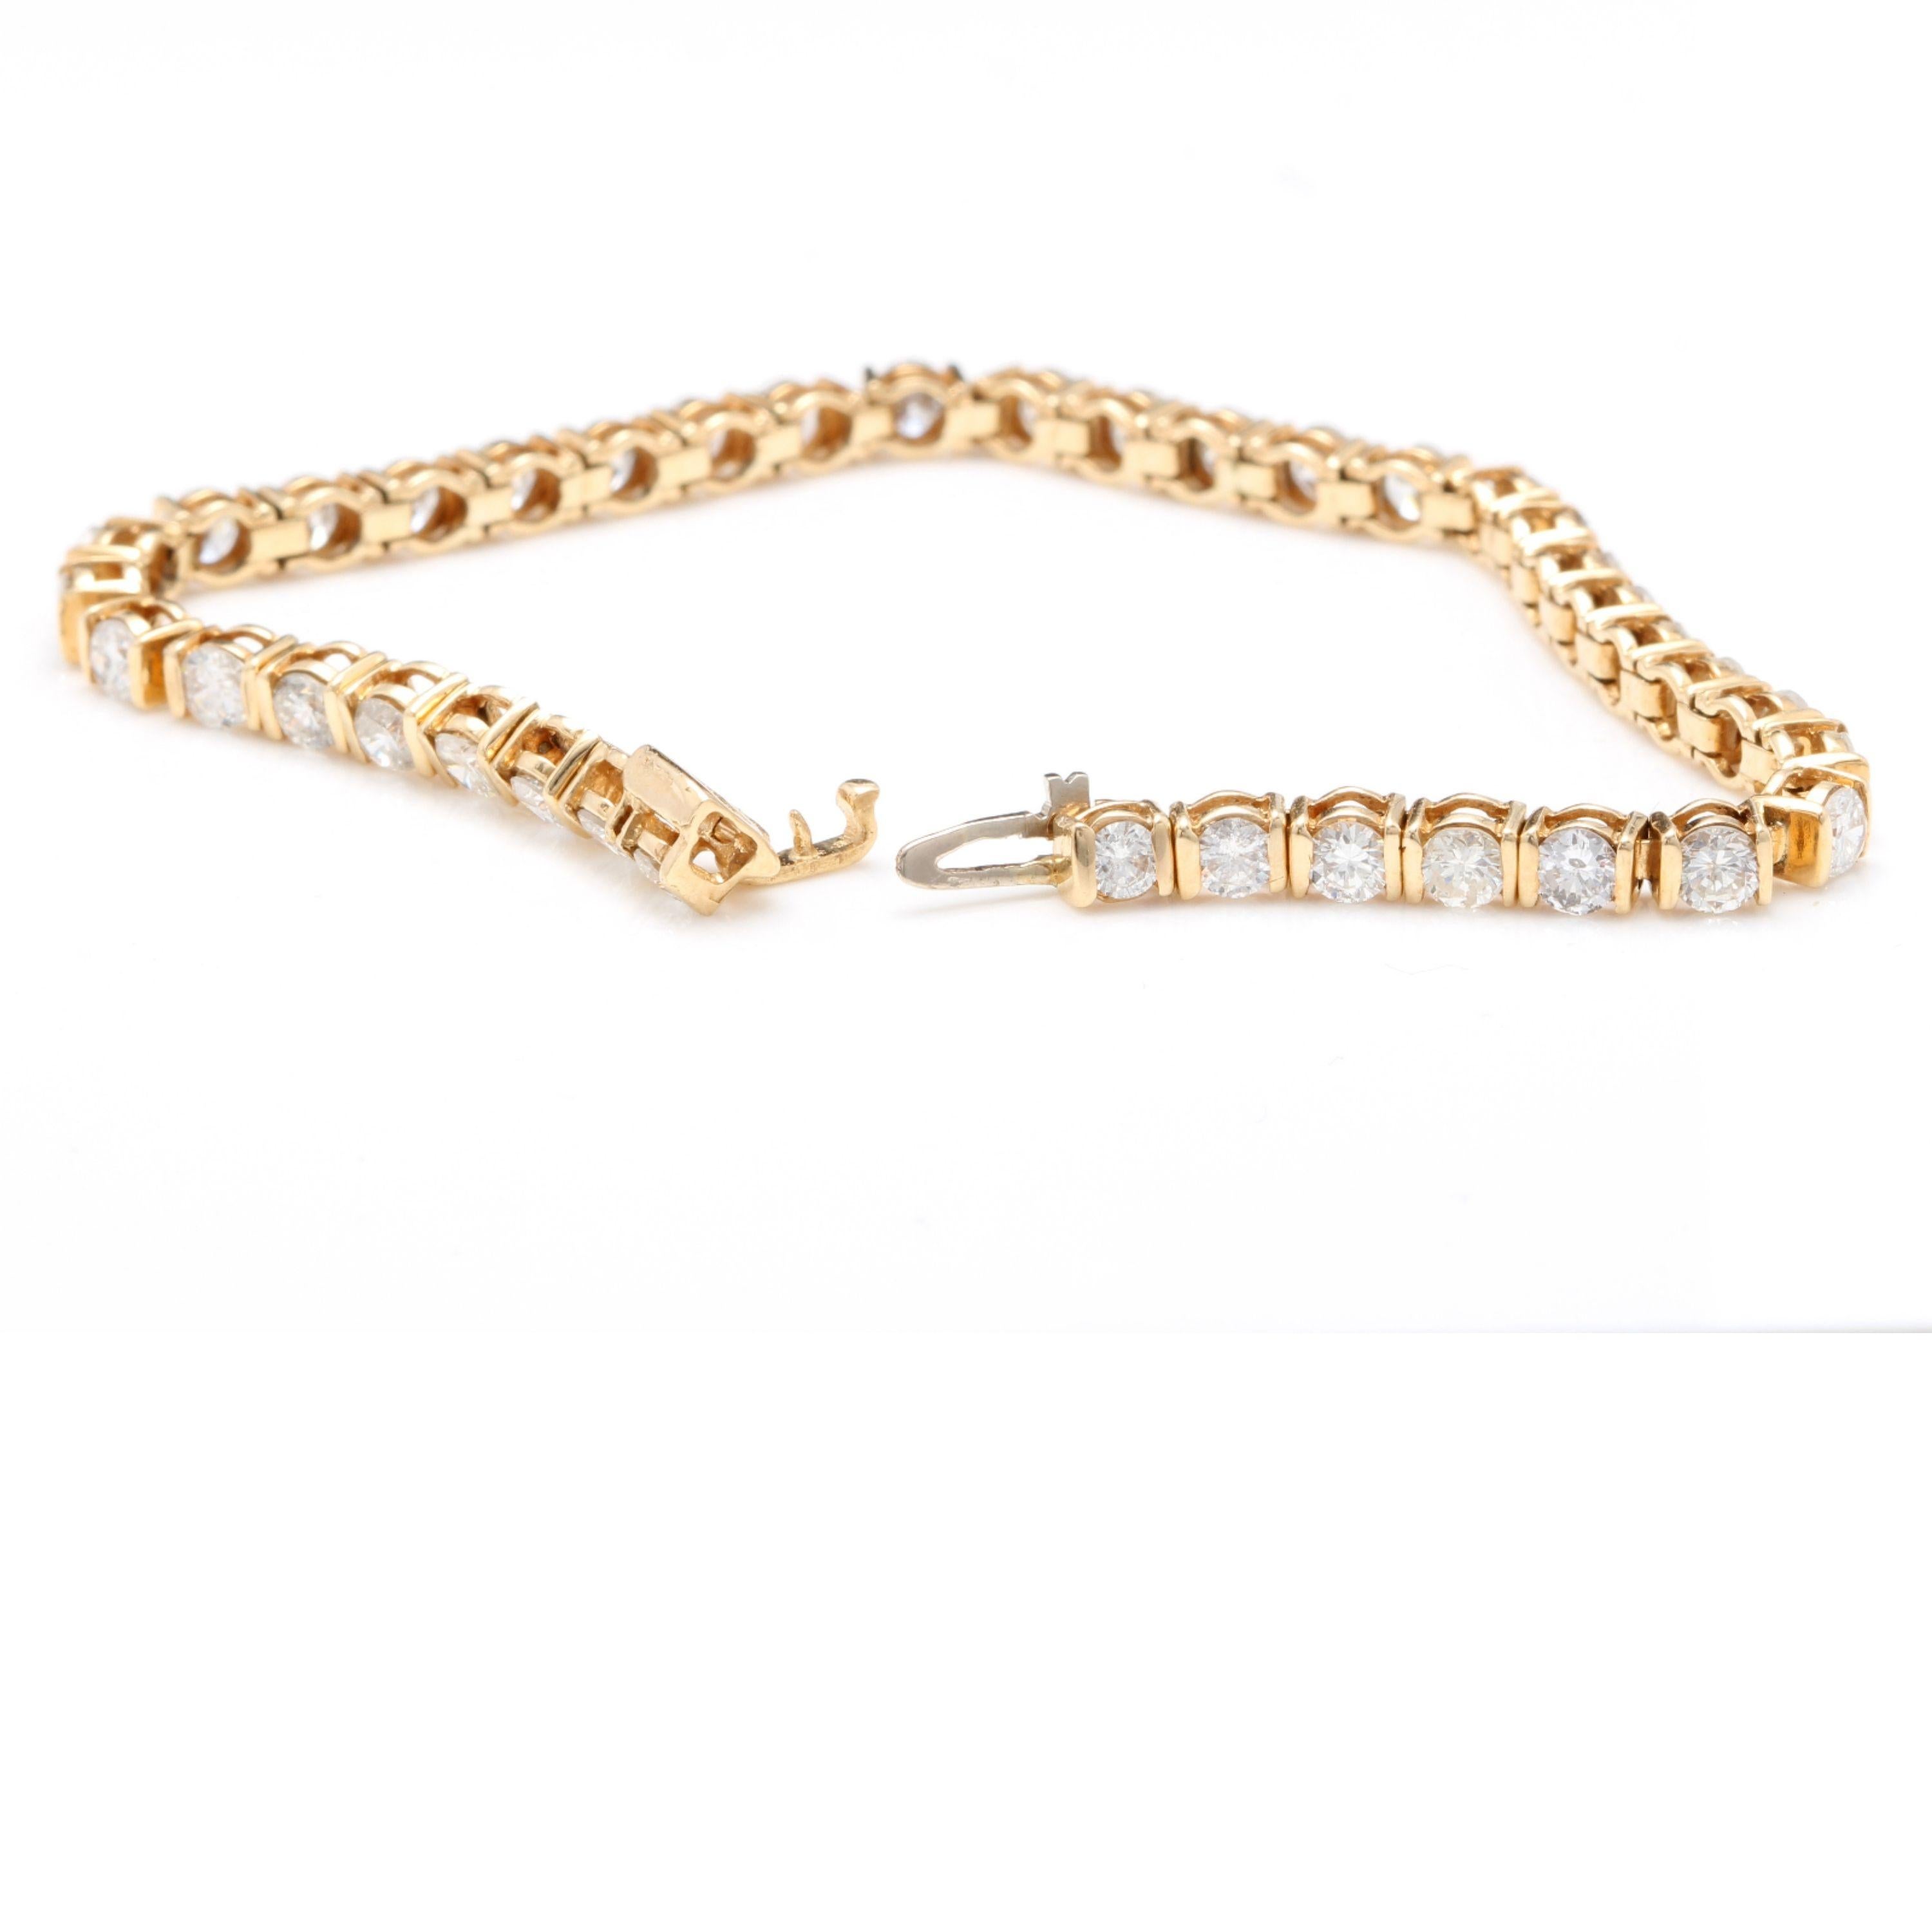 Very Impressive 5.70 Carat Natural Diamond 14 Karat Solid Yellow Gold Bracelet In New Condition For Sale In Los Angeles, CA